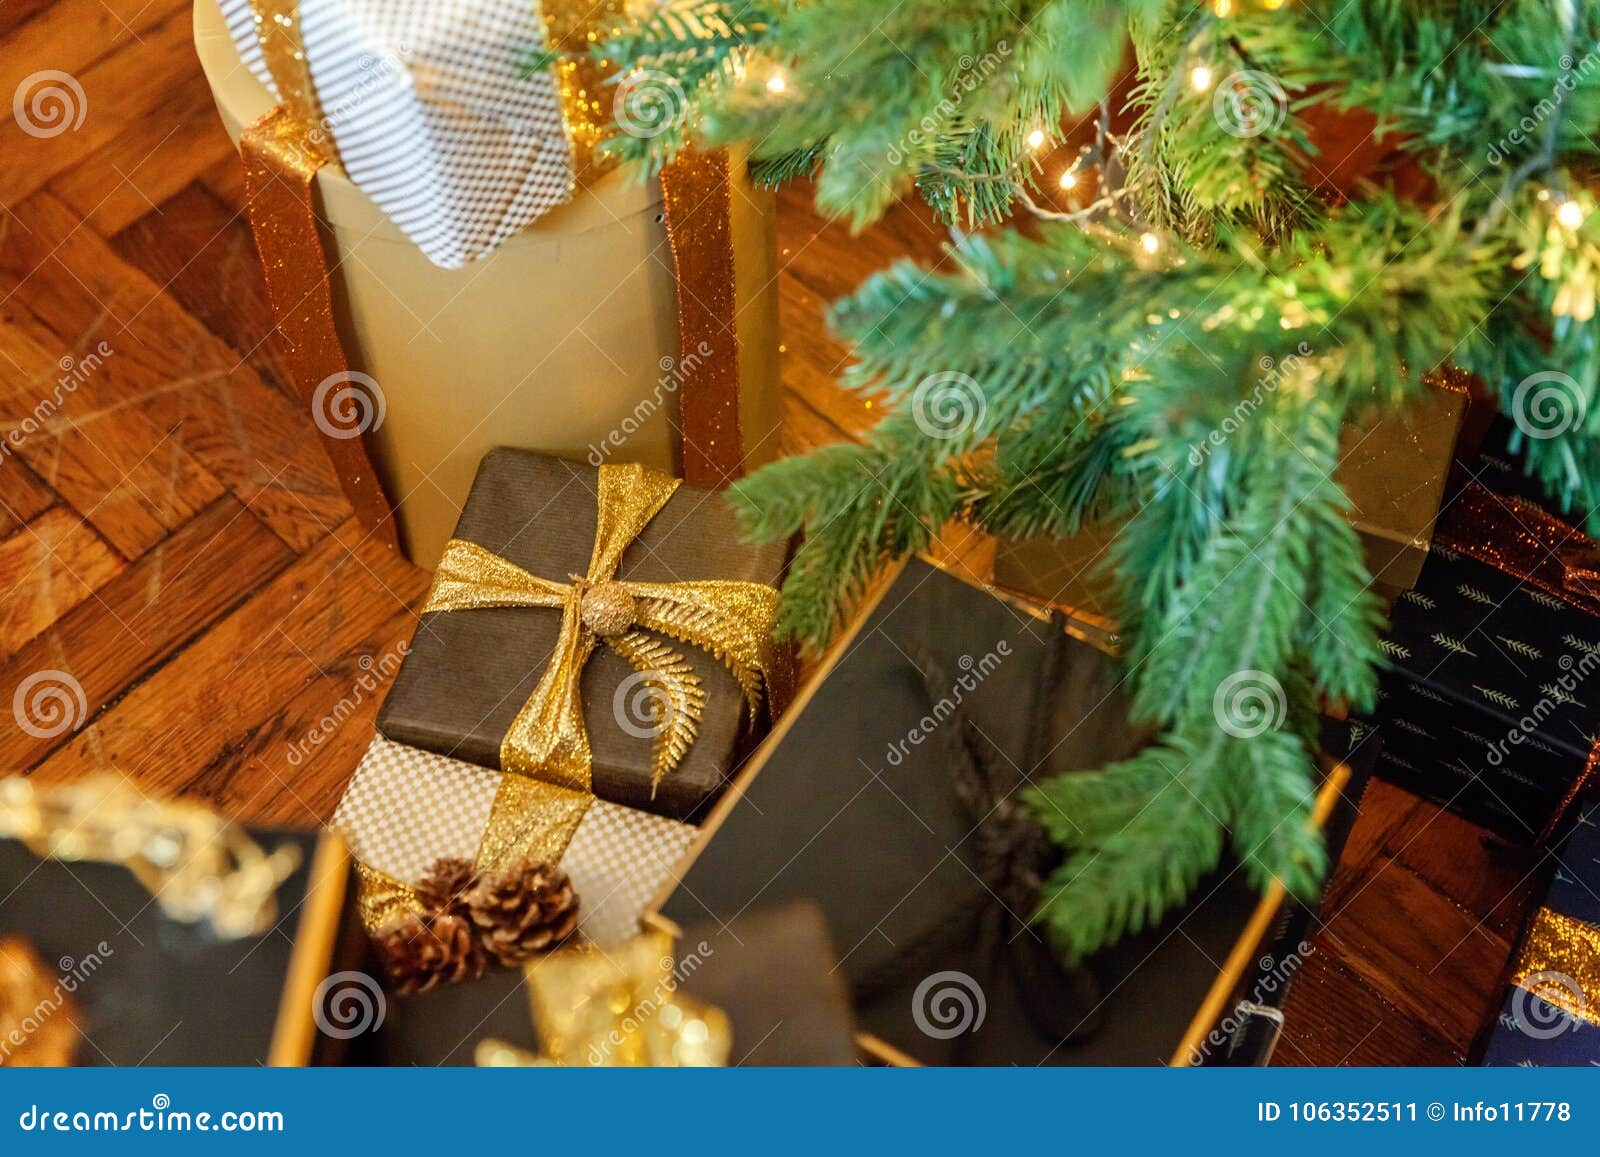 Gift Boxes Near the Christmas Tree Stock Image - Image of beauty ...